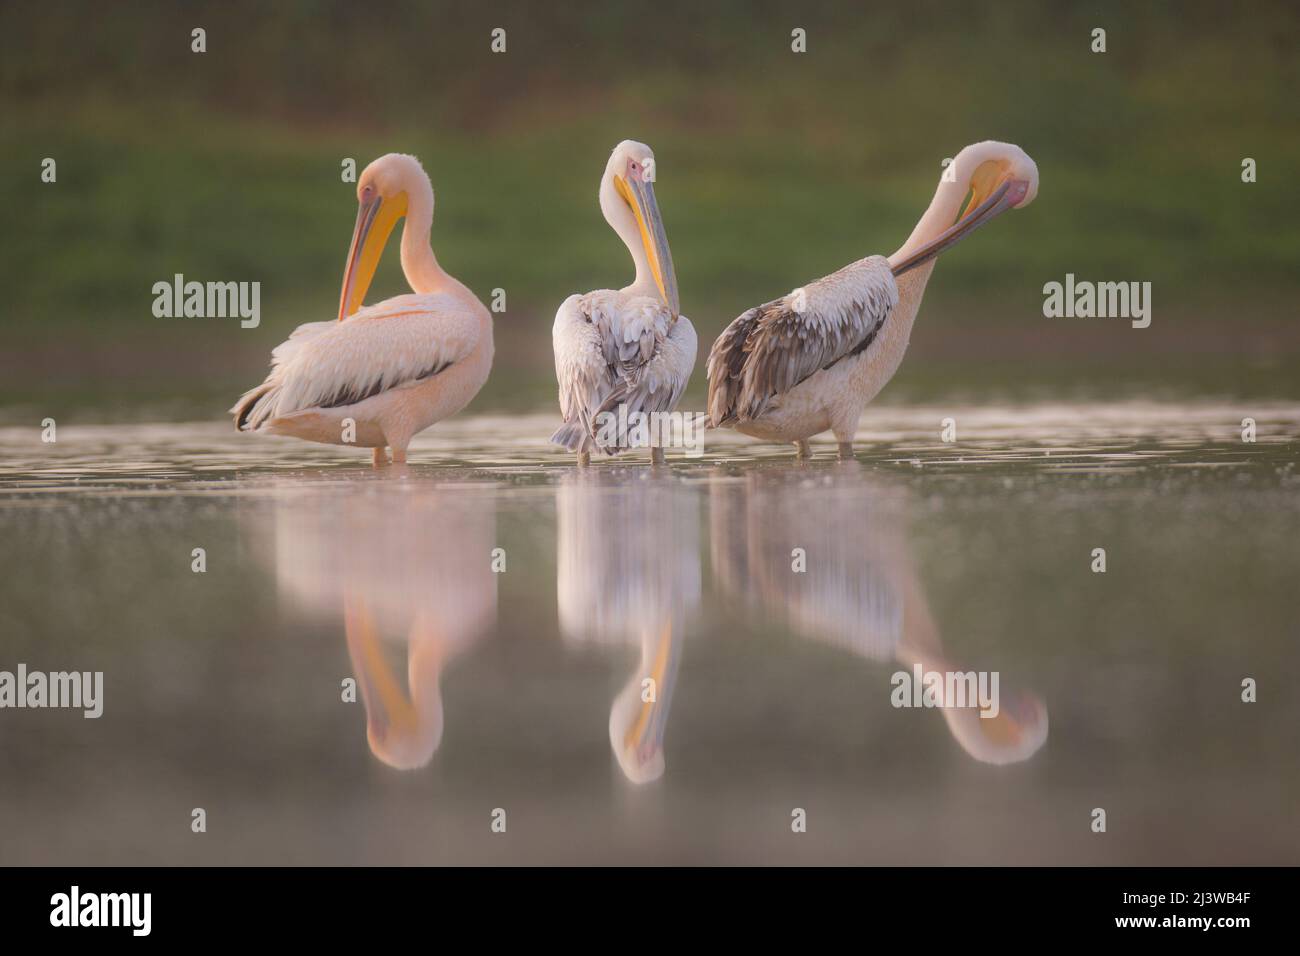 A flock of Pelicans Photographed in Israel in August Stock Photo